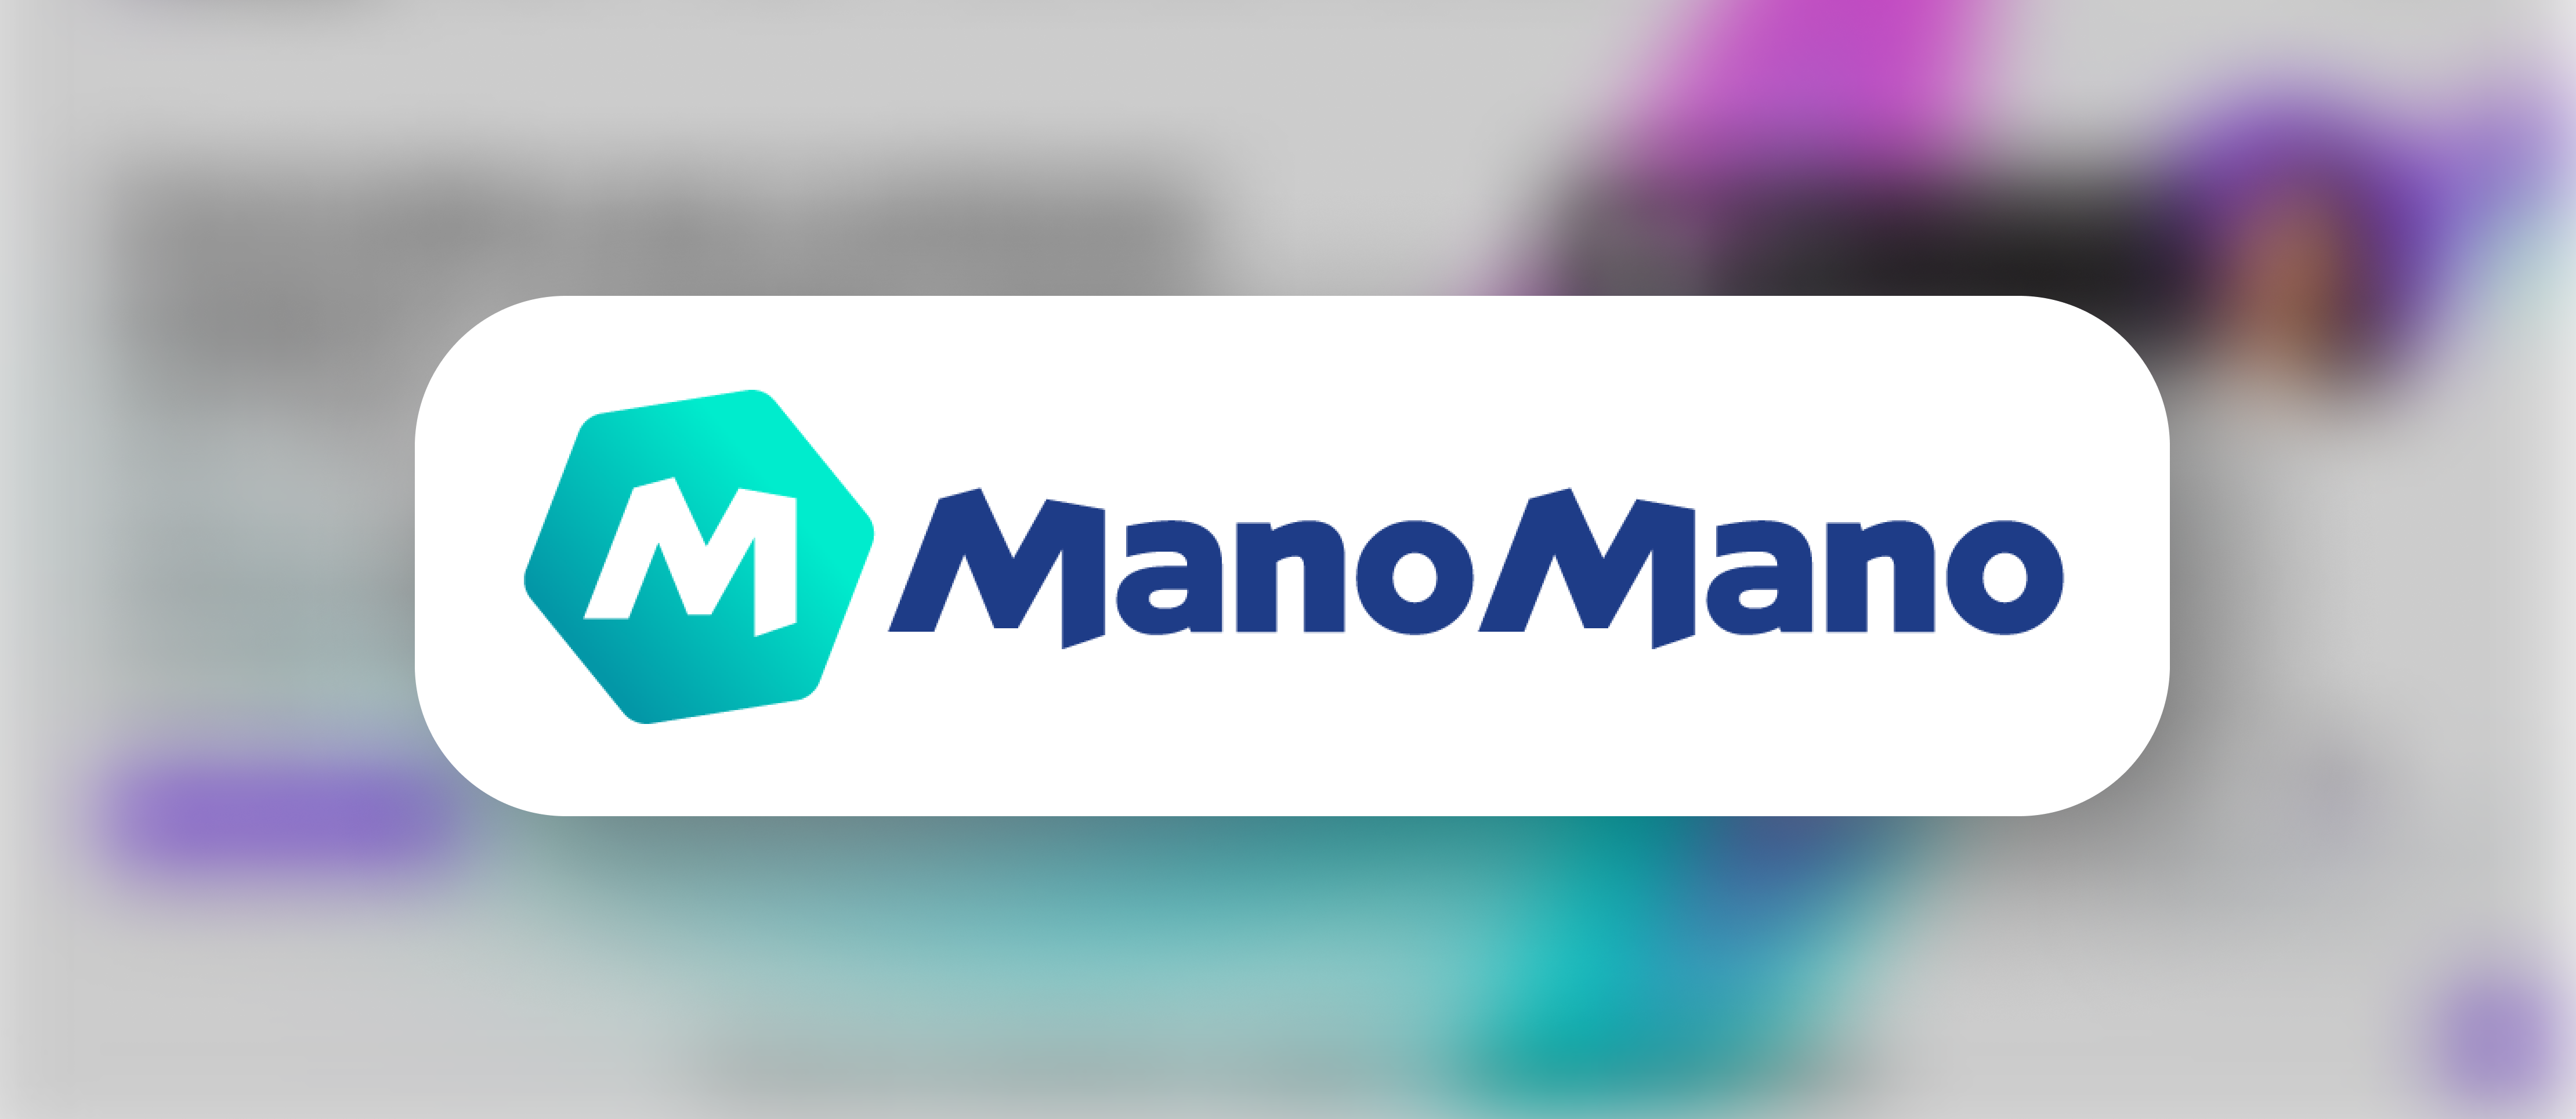 We've added ManoMano to our app store!